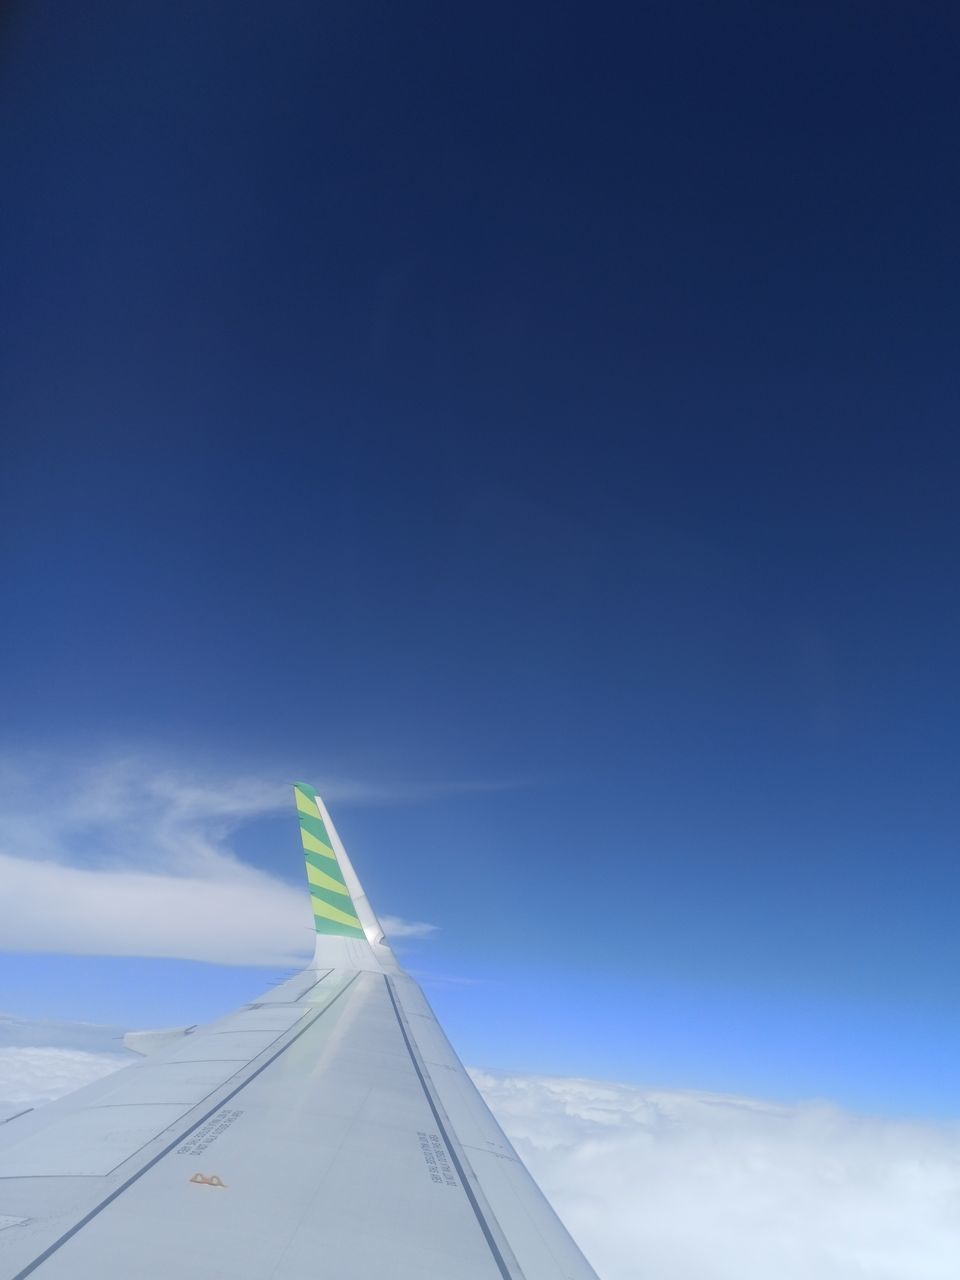 AIRPLANE WING AGAINST SKY